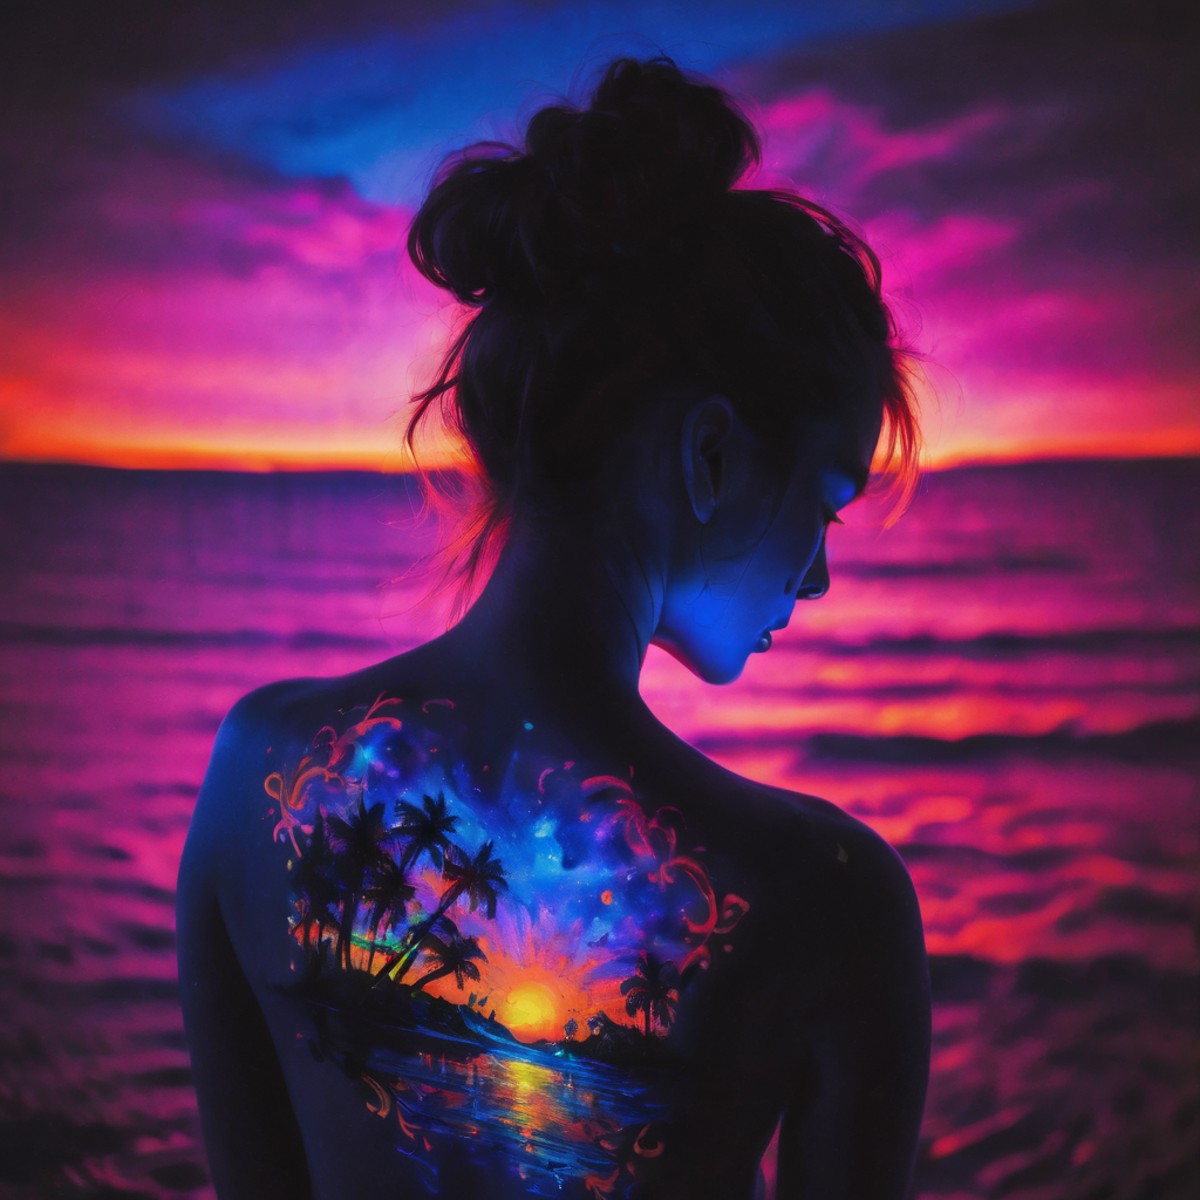 blacklight uv painted on the back of a girl depicting a famous piece of fine art